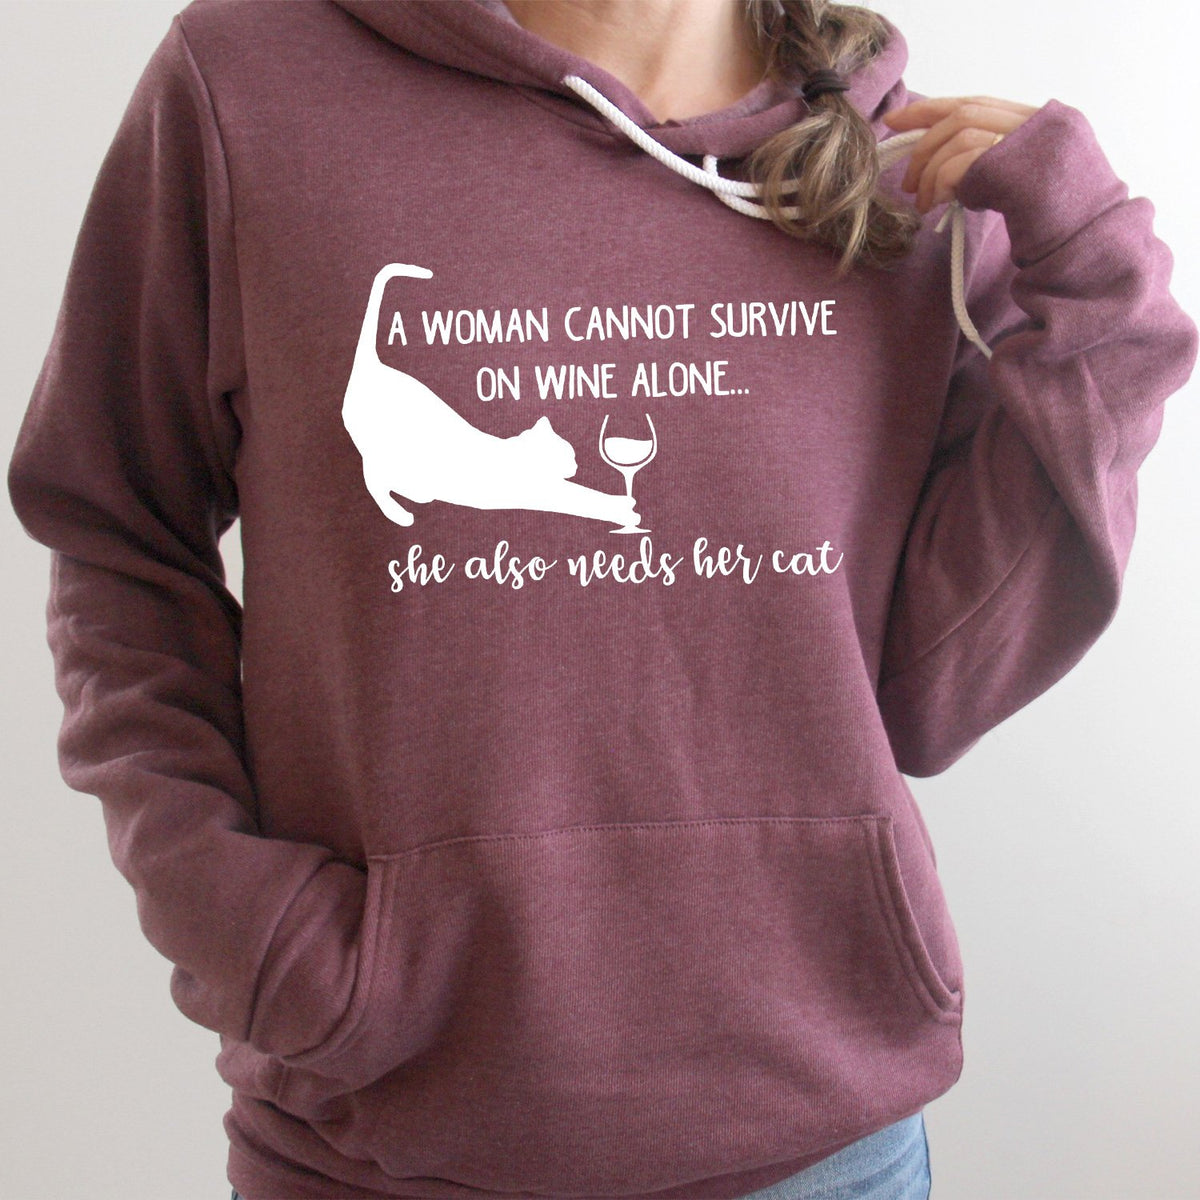 A Woman Cannot Survive on Wine Alone, She also Needs her Cat - Hoodie Sweatshirt